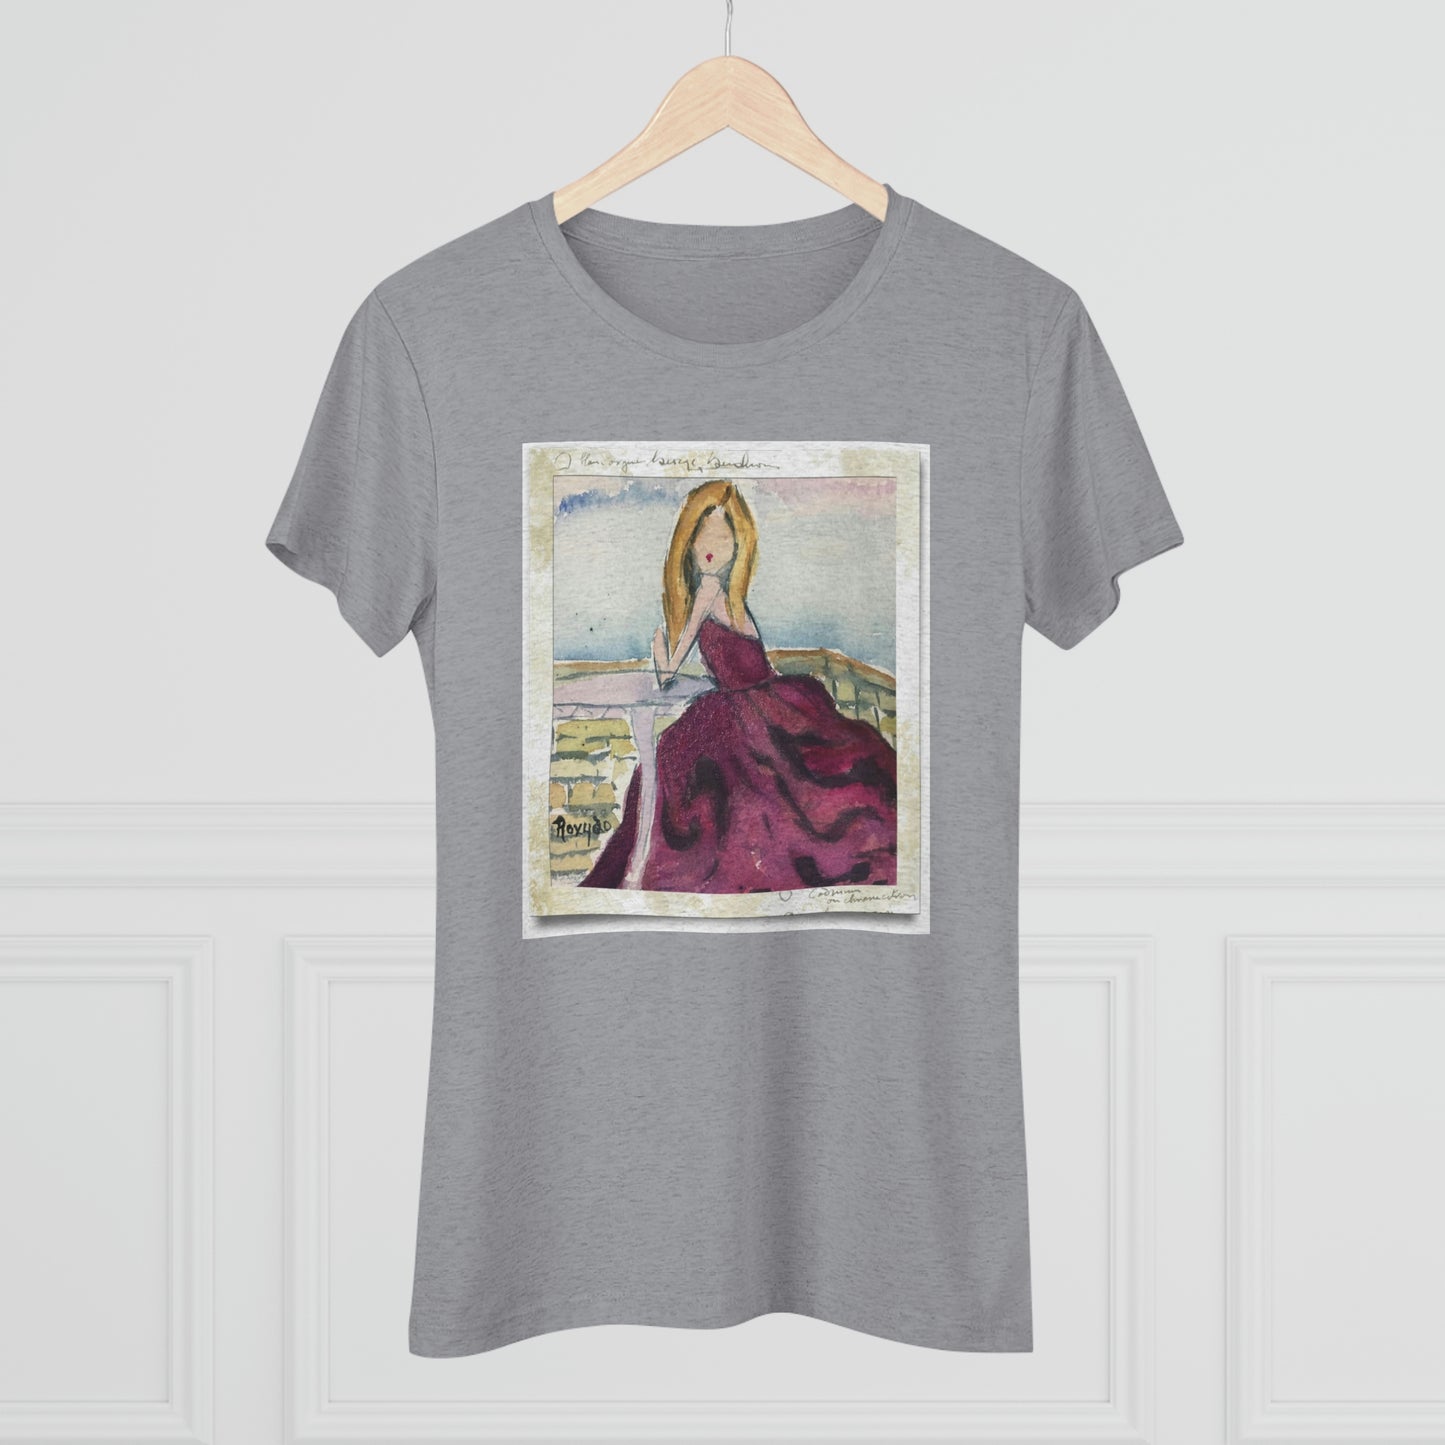 Beach Babe in a Gown Women's fitted Triblend Tee  tee shirt